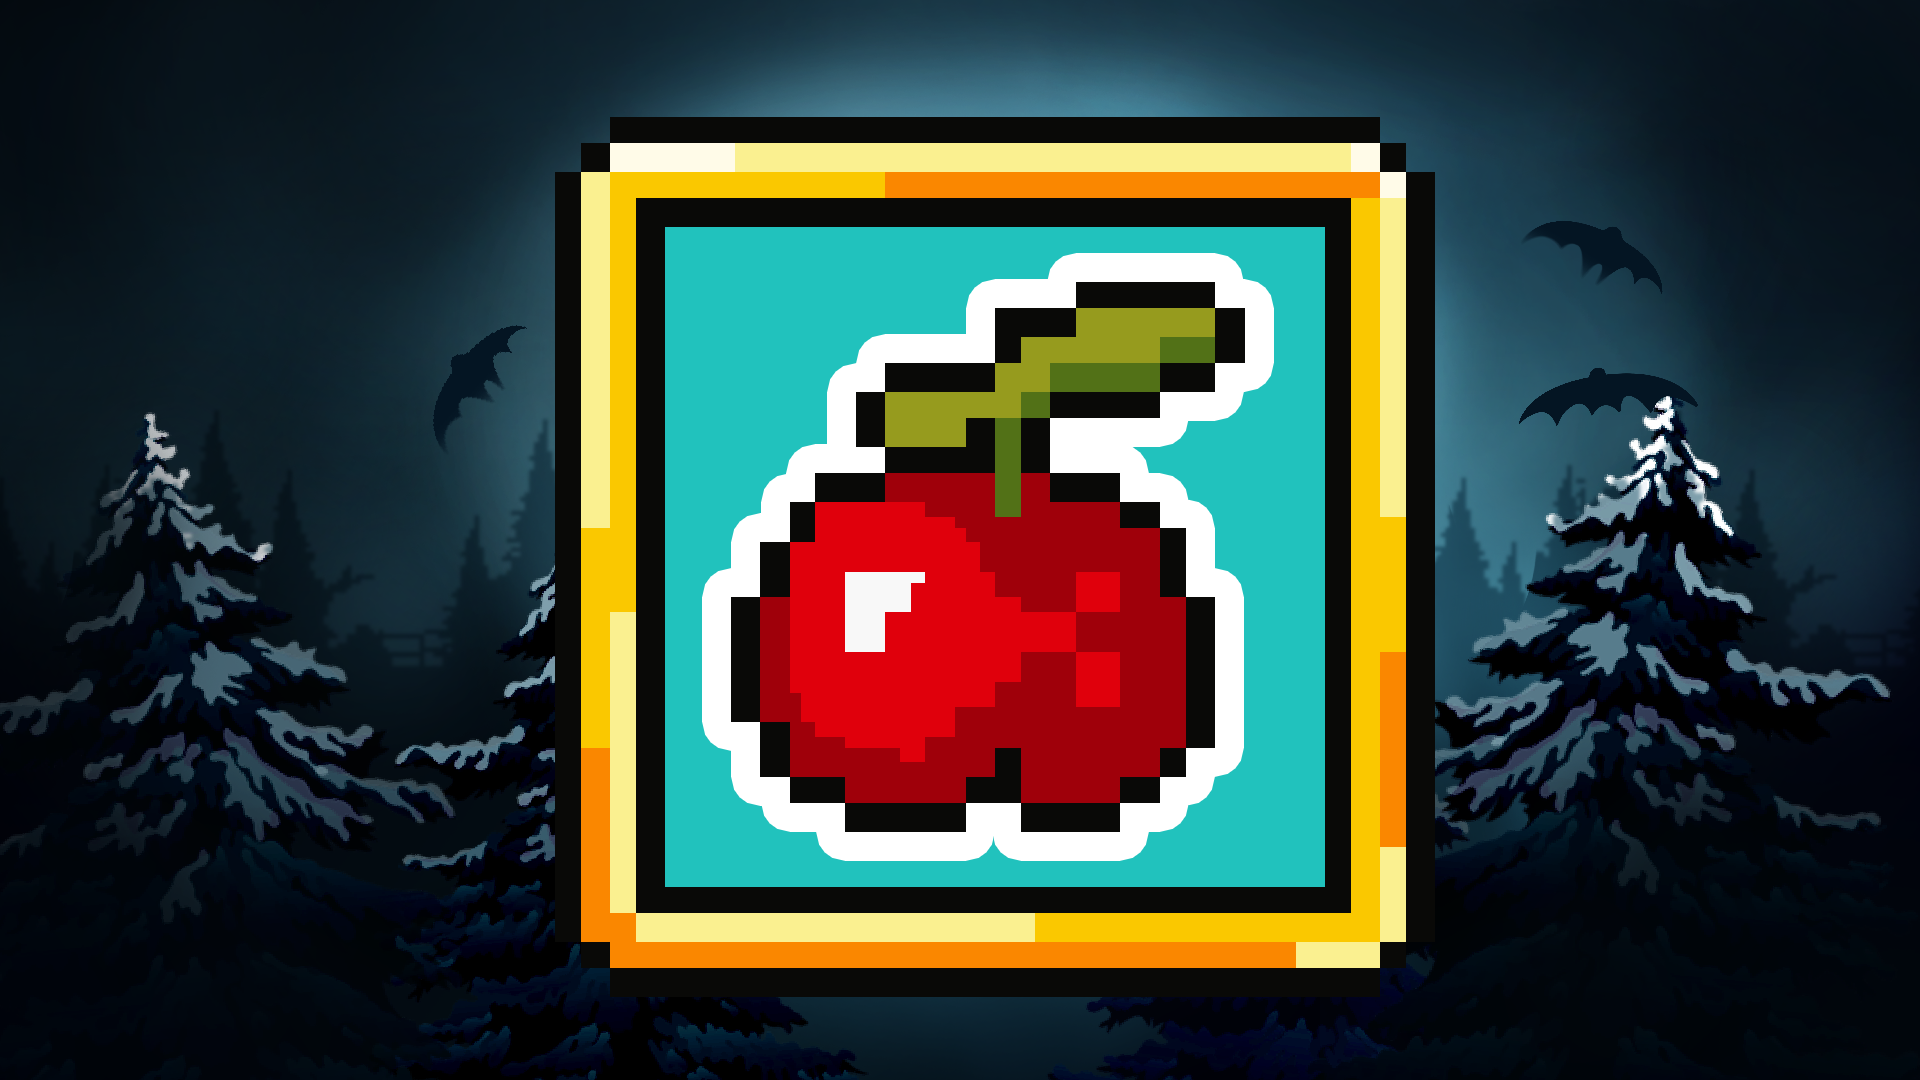 Icon for Eat an apple